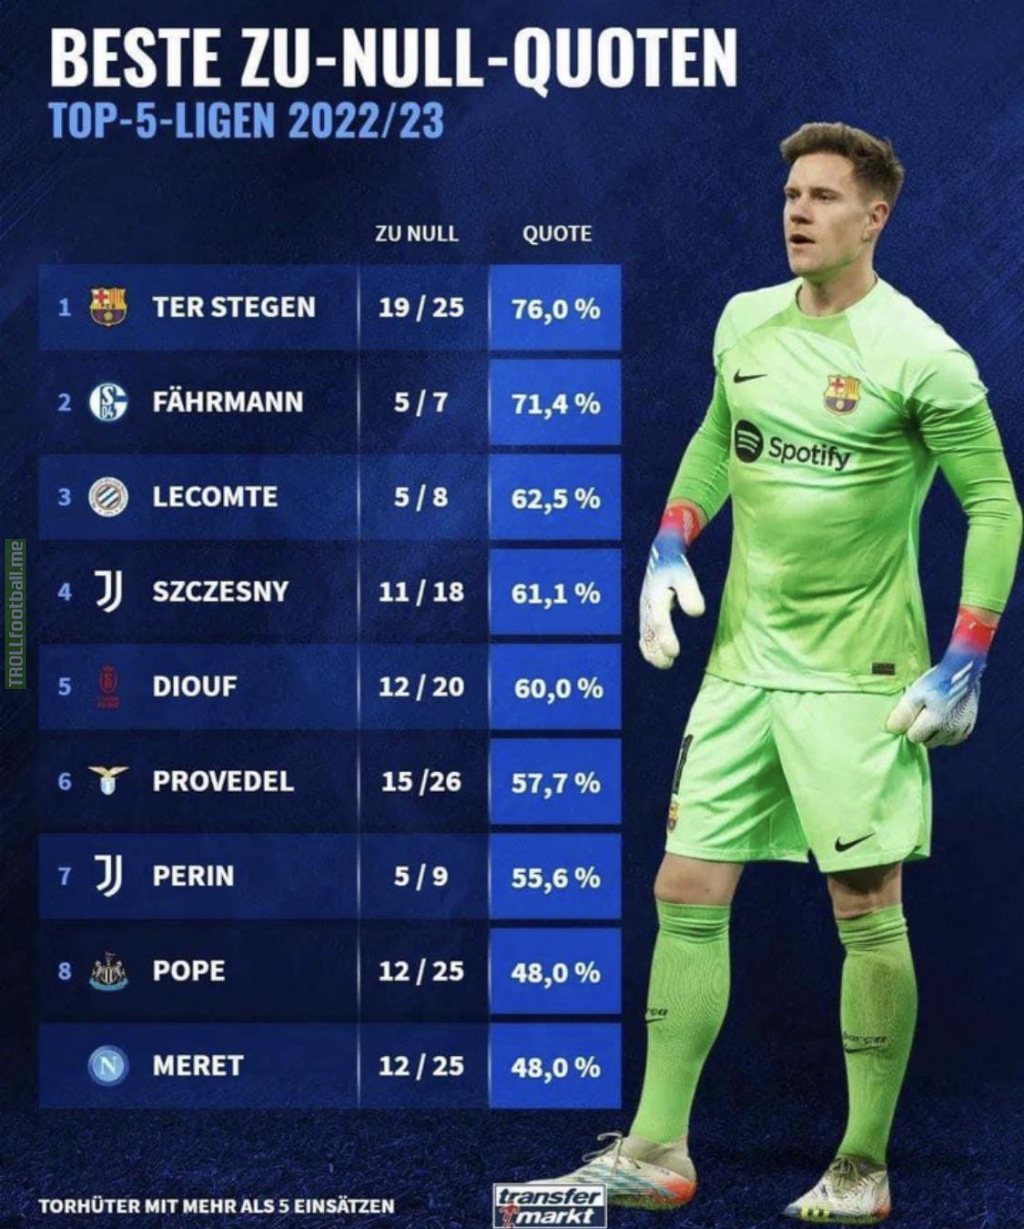 [Transfermarkt] Best clean sheet quotes in the Top 5 leagues (only GKs with 5+ games)